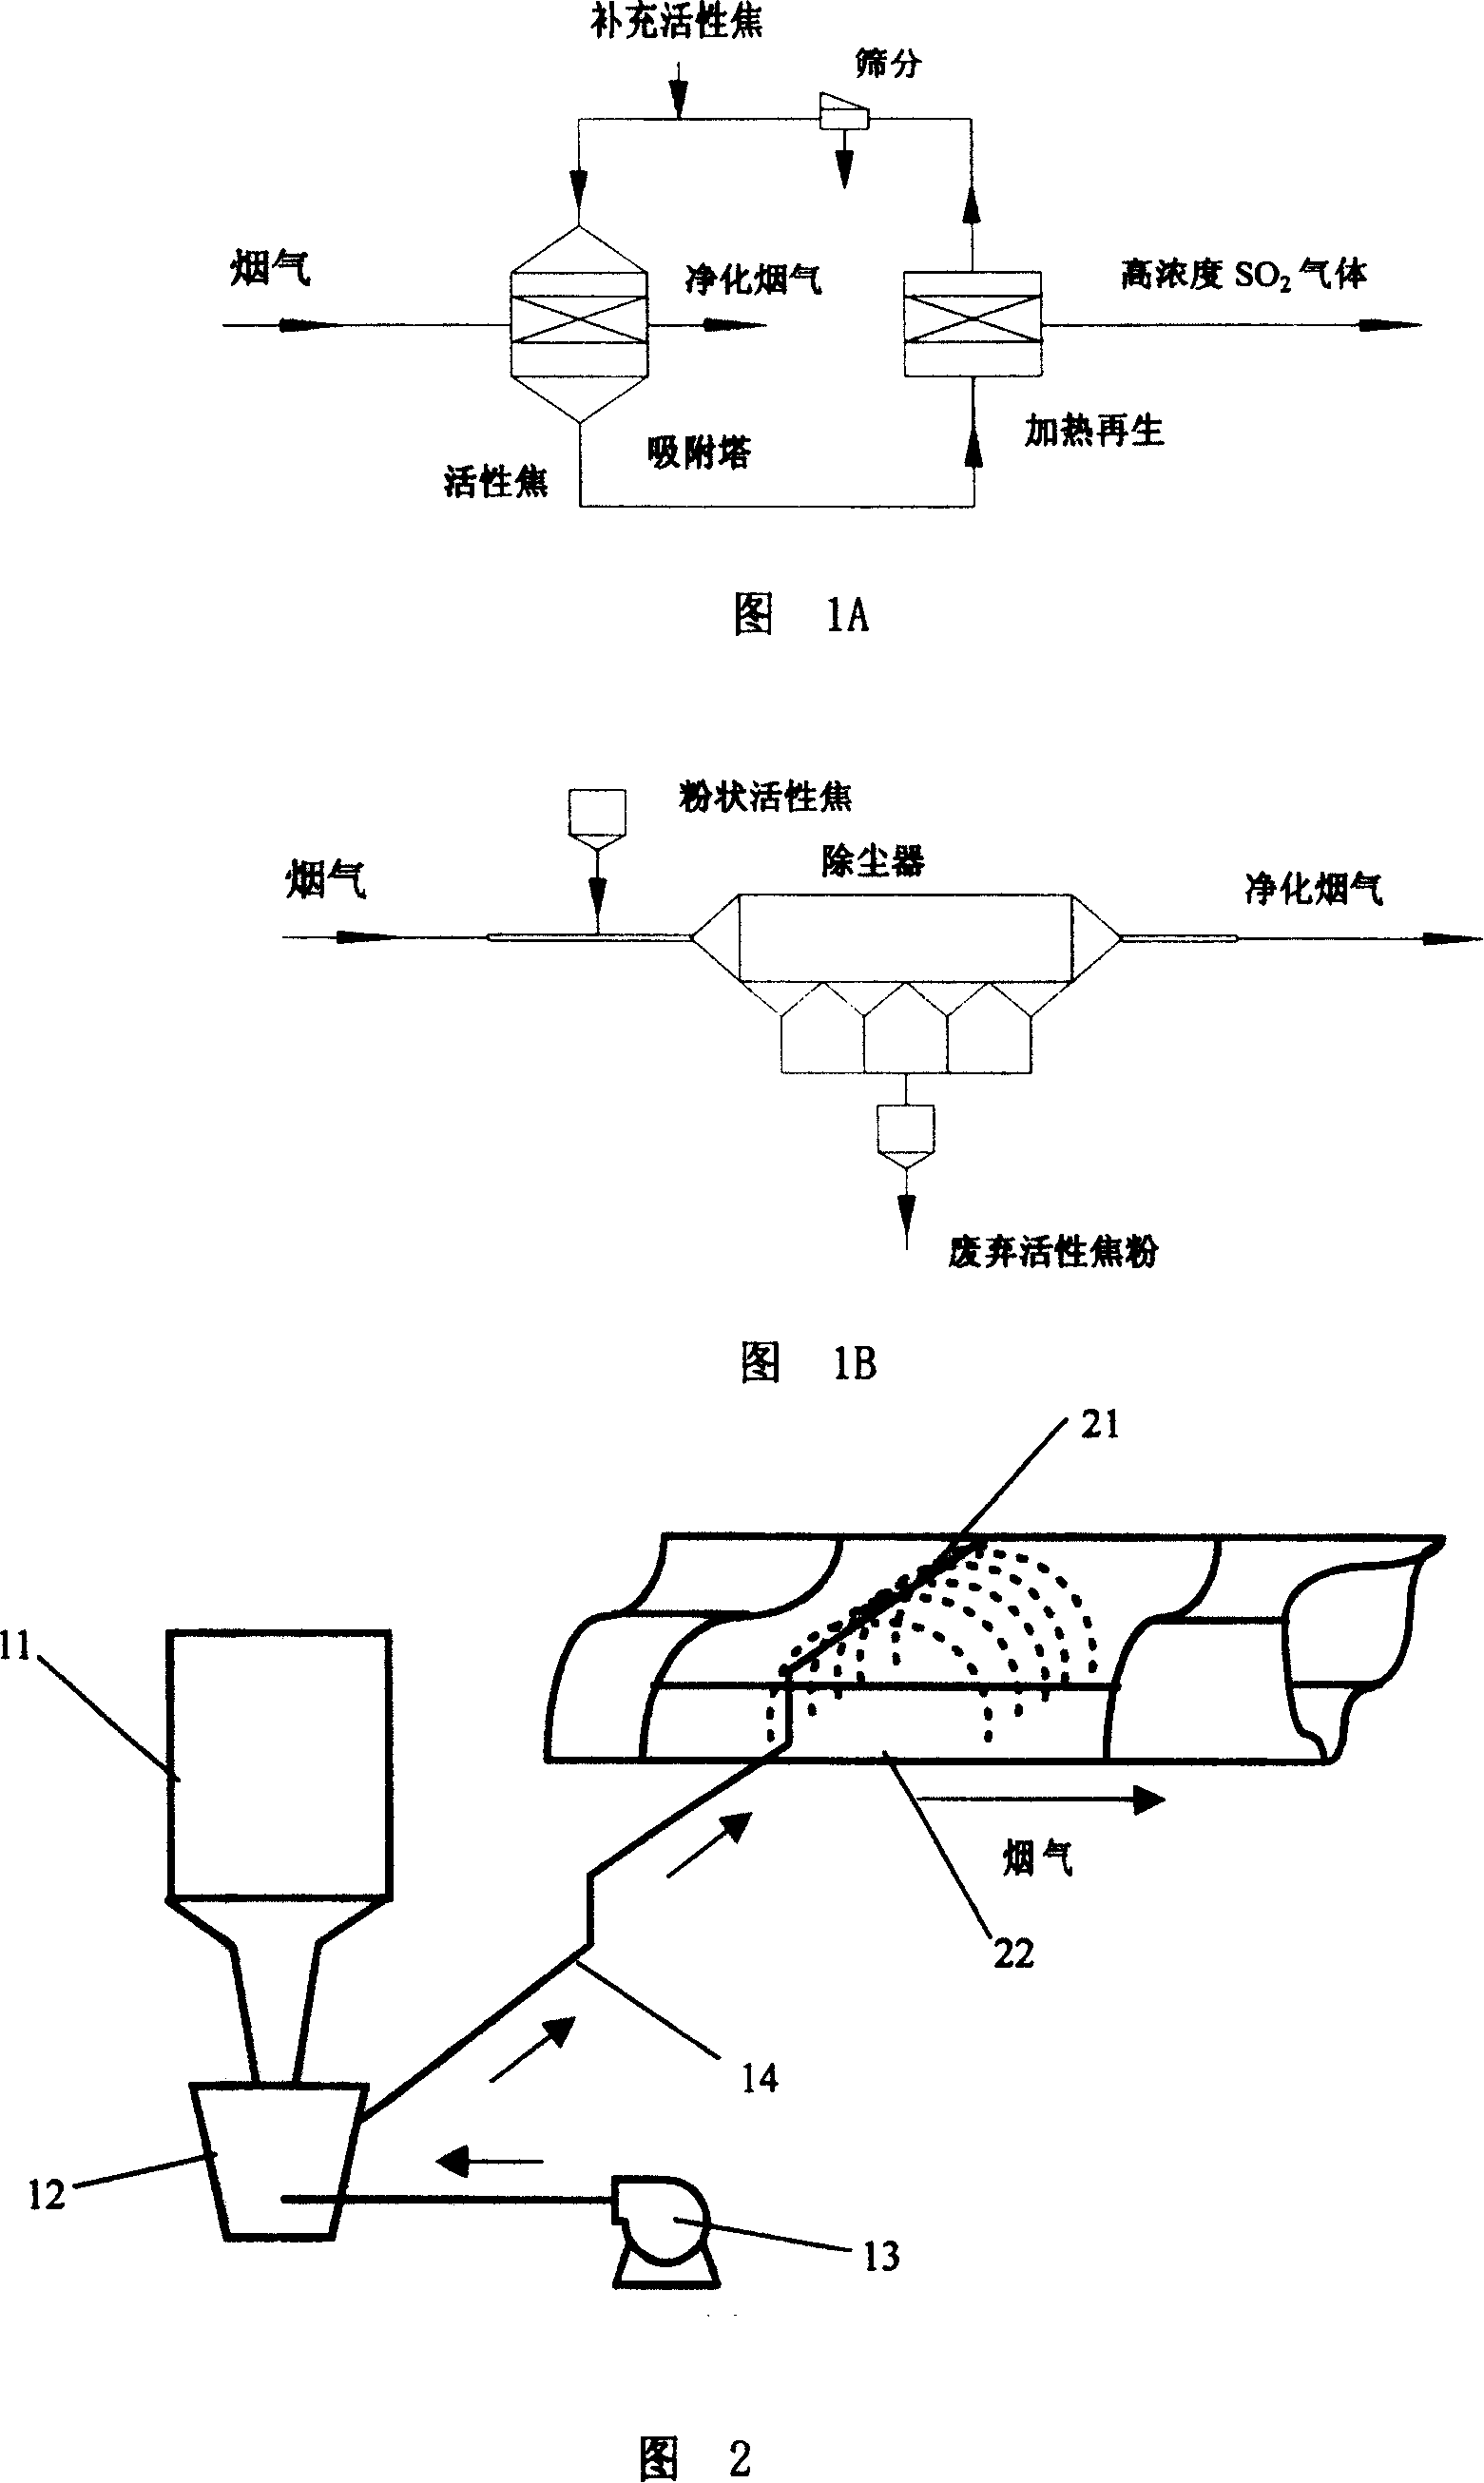 Method for purifying flue gas by application of active coke